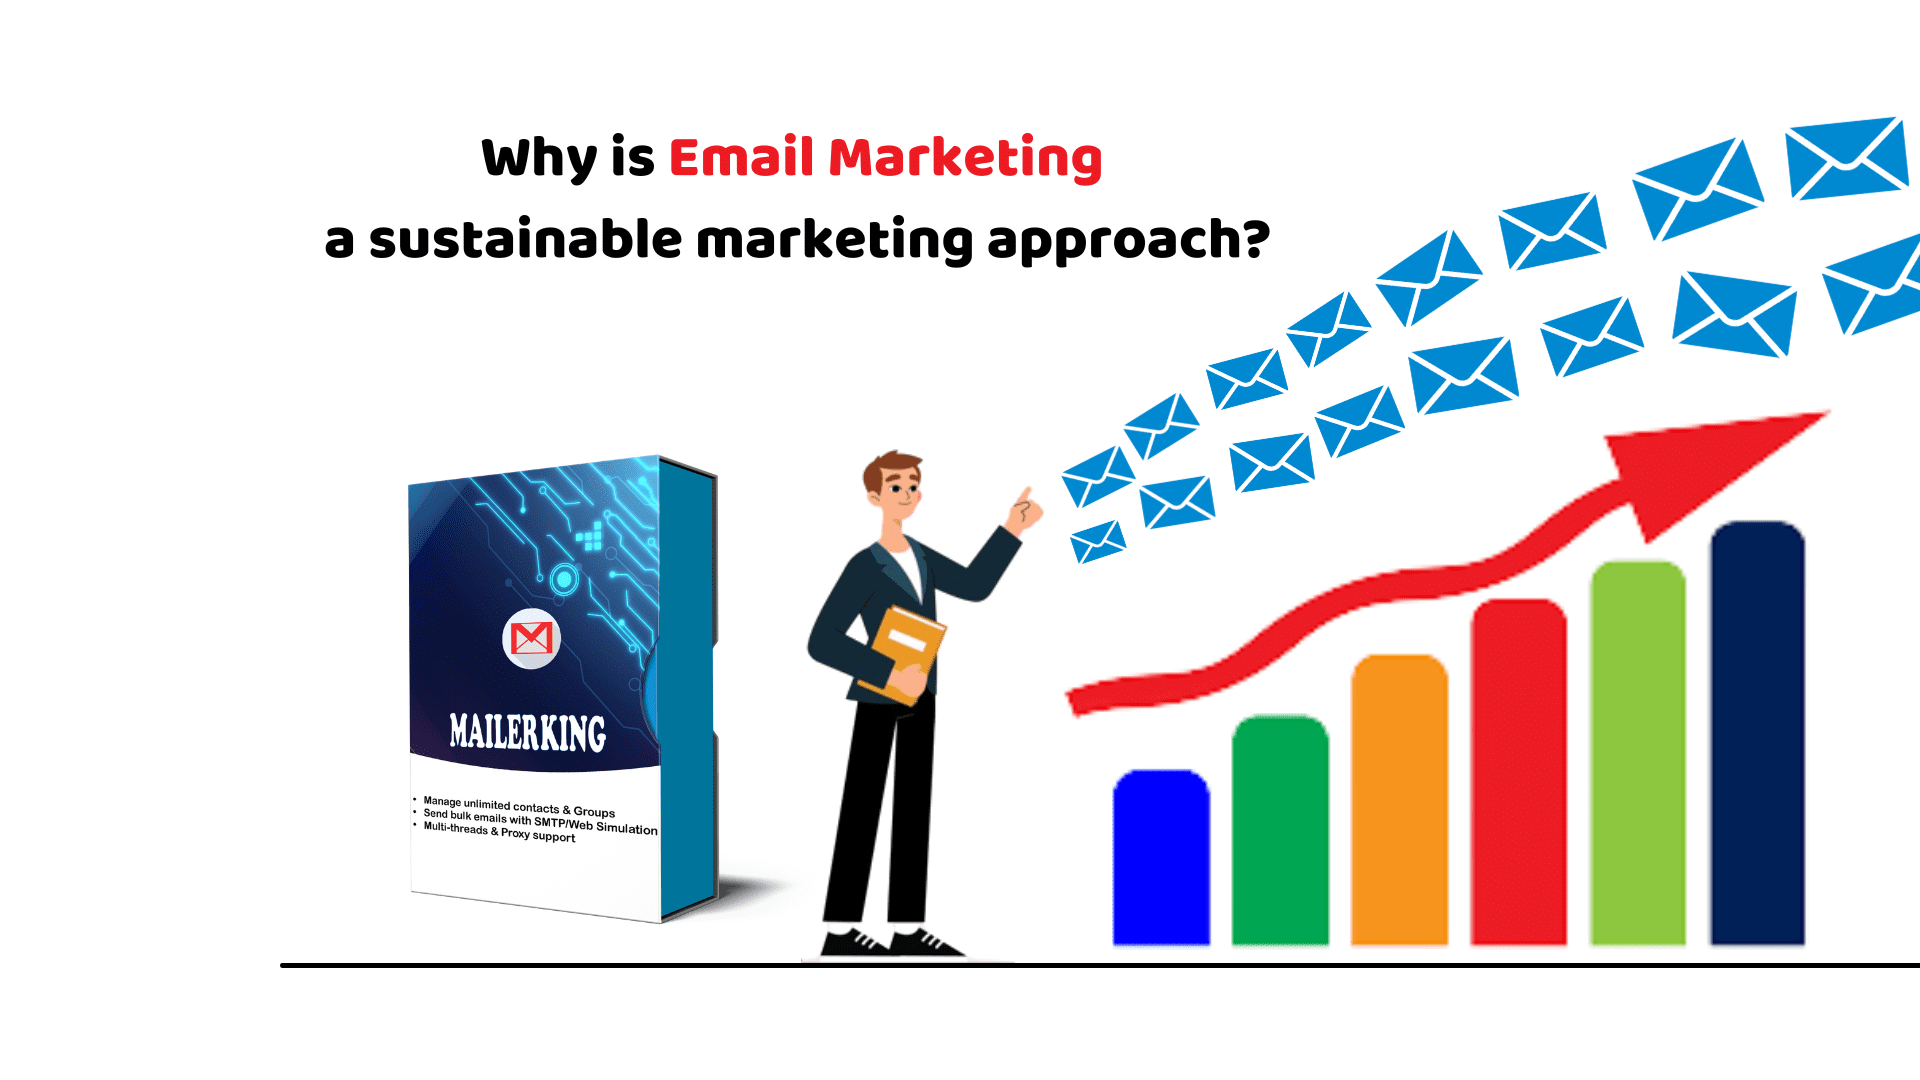 Why is email marketing a sustainable marketing approach